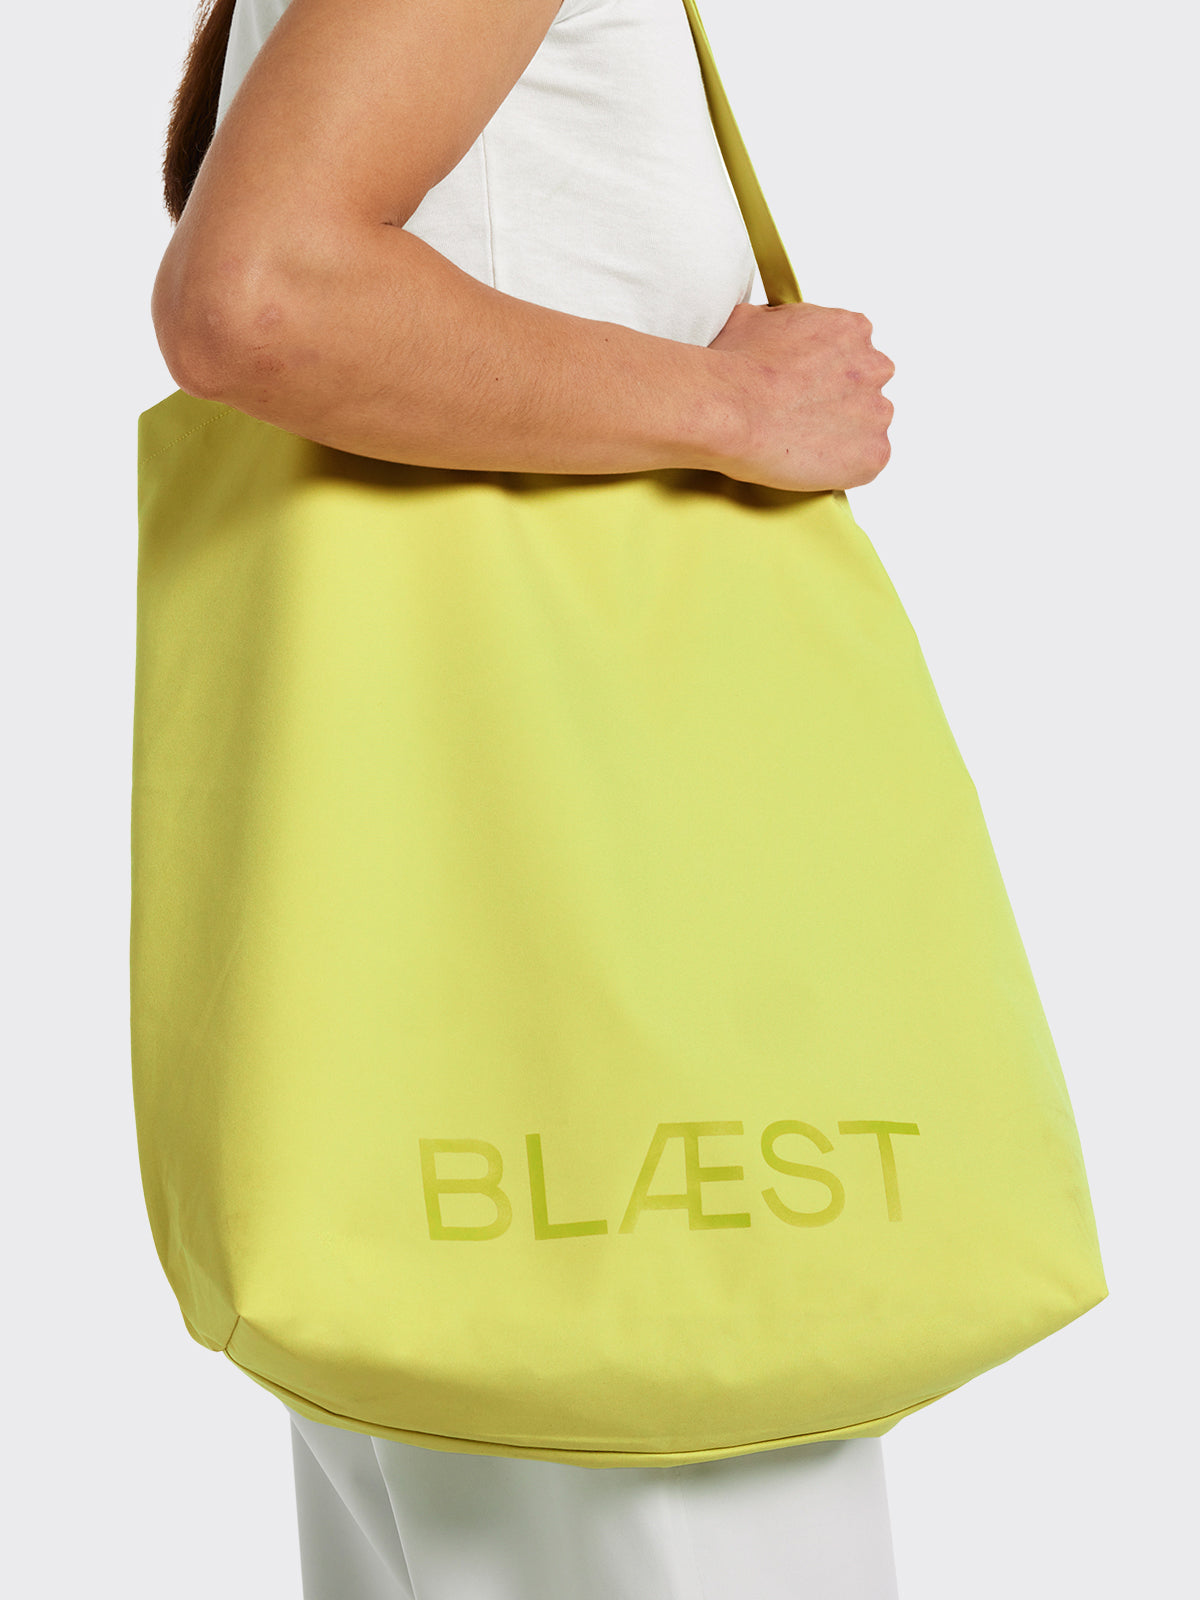 Moa tote bag in Muted Lime by Blæst